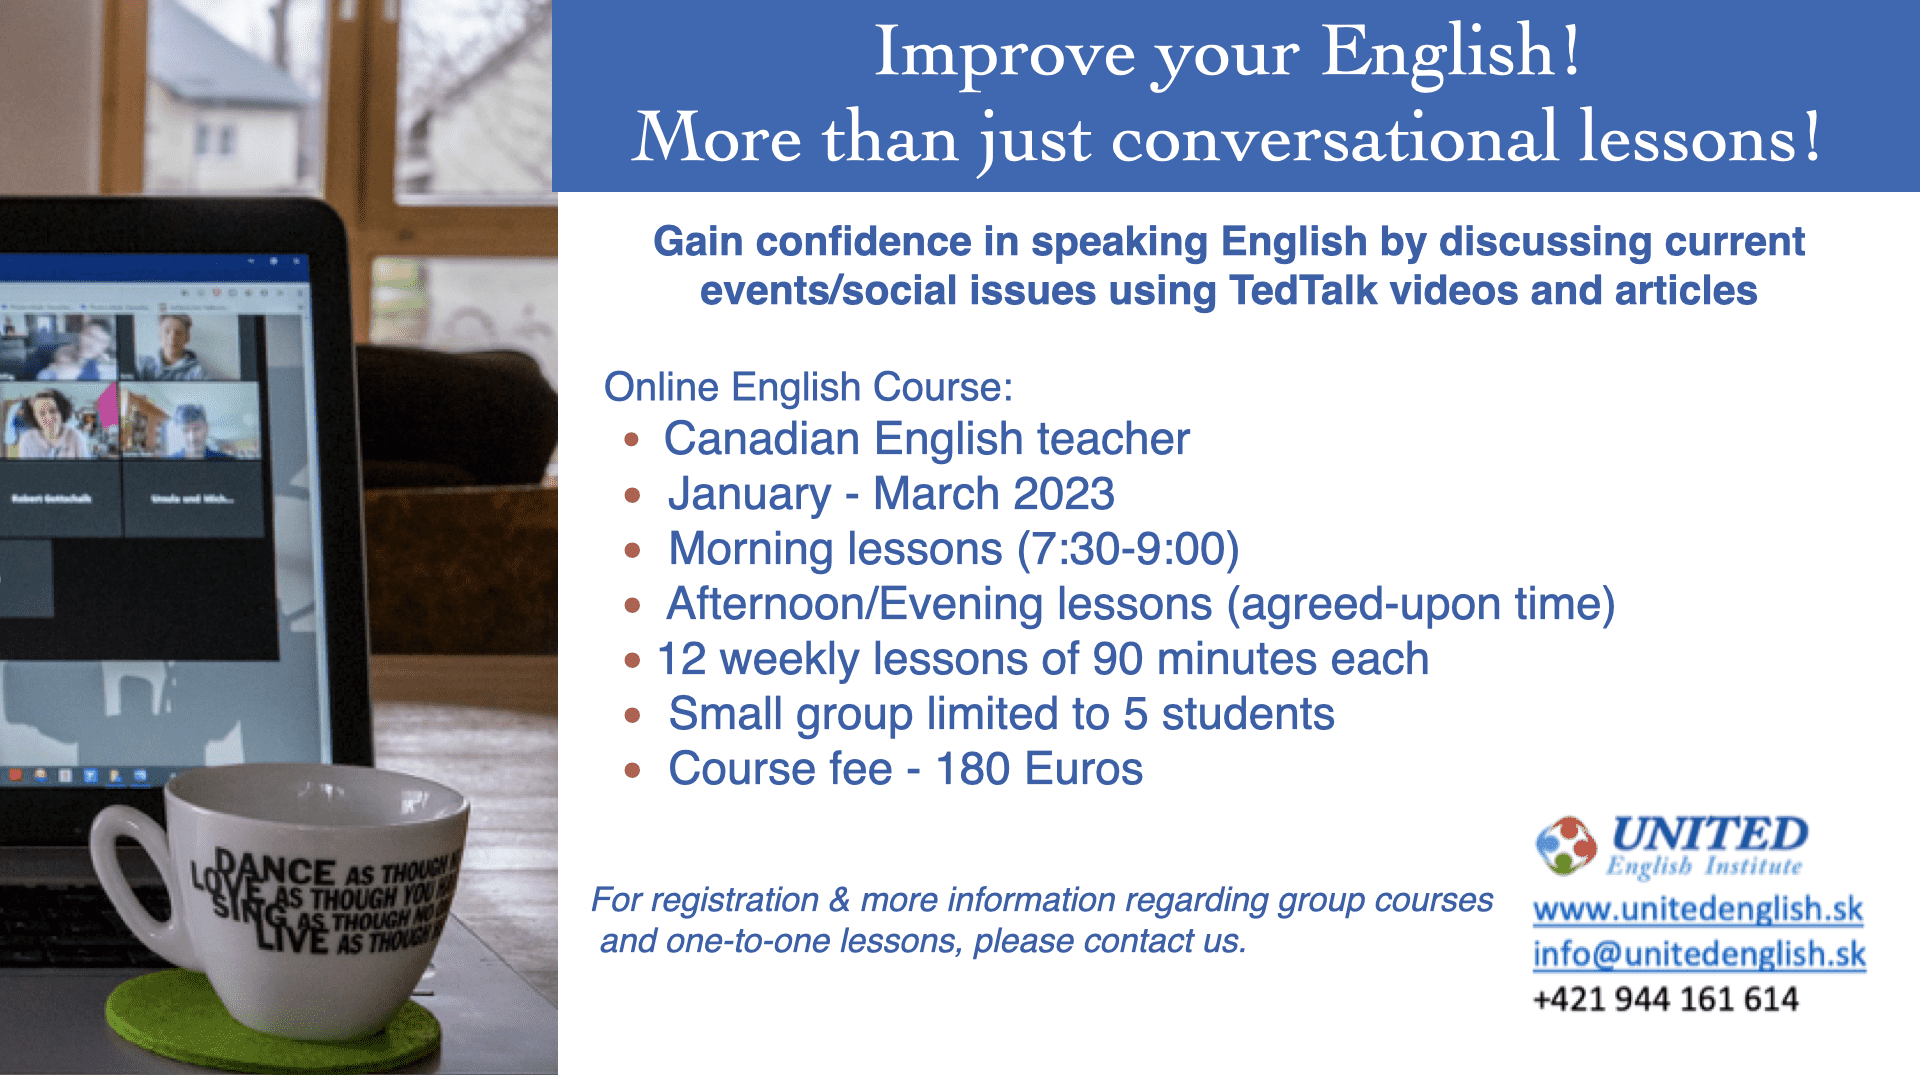 Course for Job Interview Preparation in English